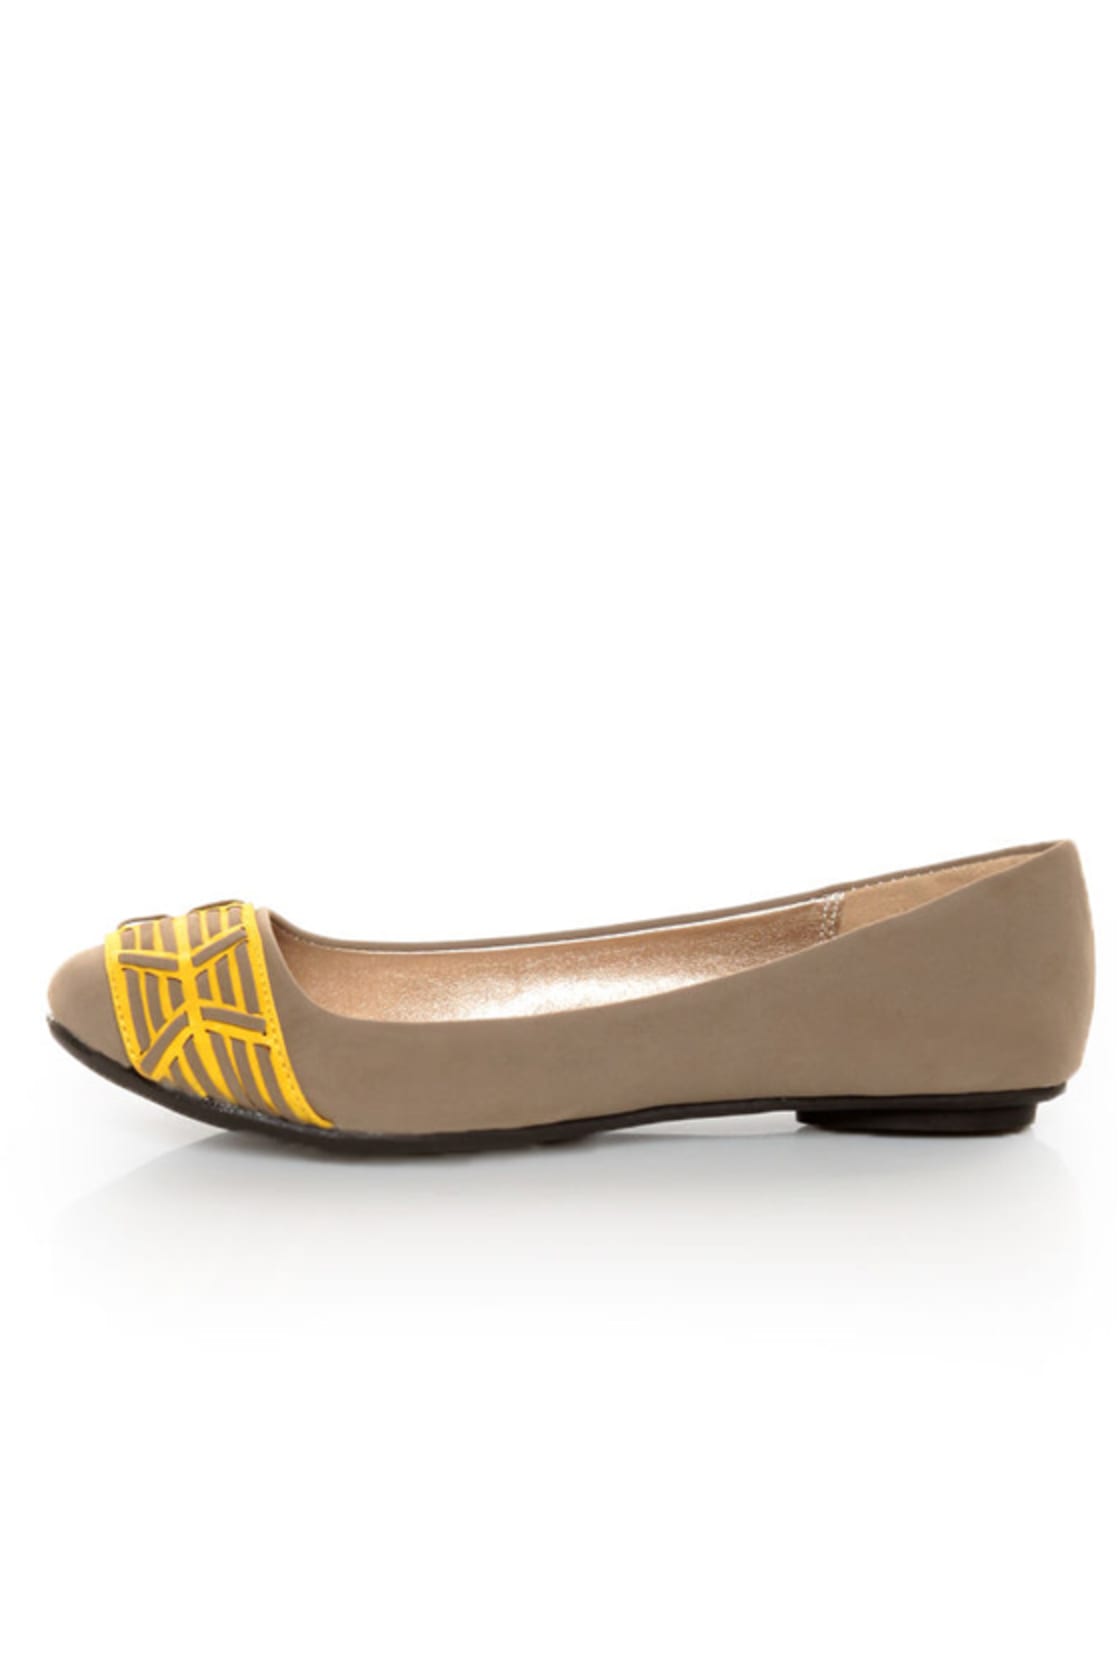 Qupid Thesis 193 Taupe Nubuck Two Tone Toe Band Ballet Flats - $25.00 ...